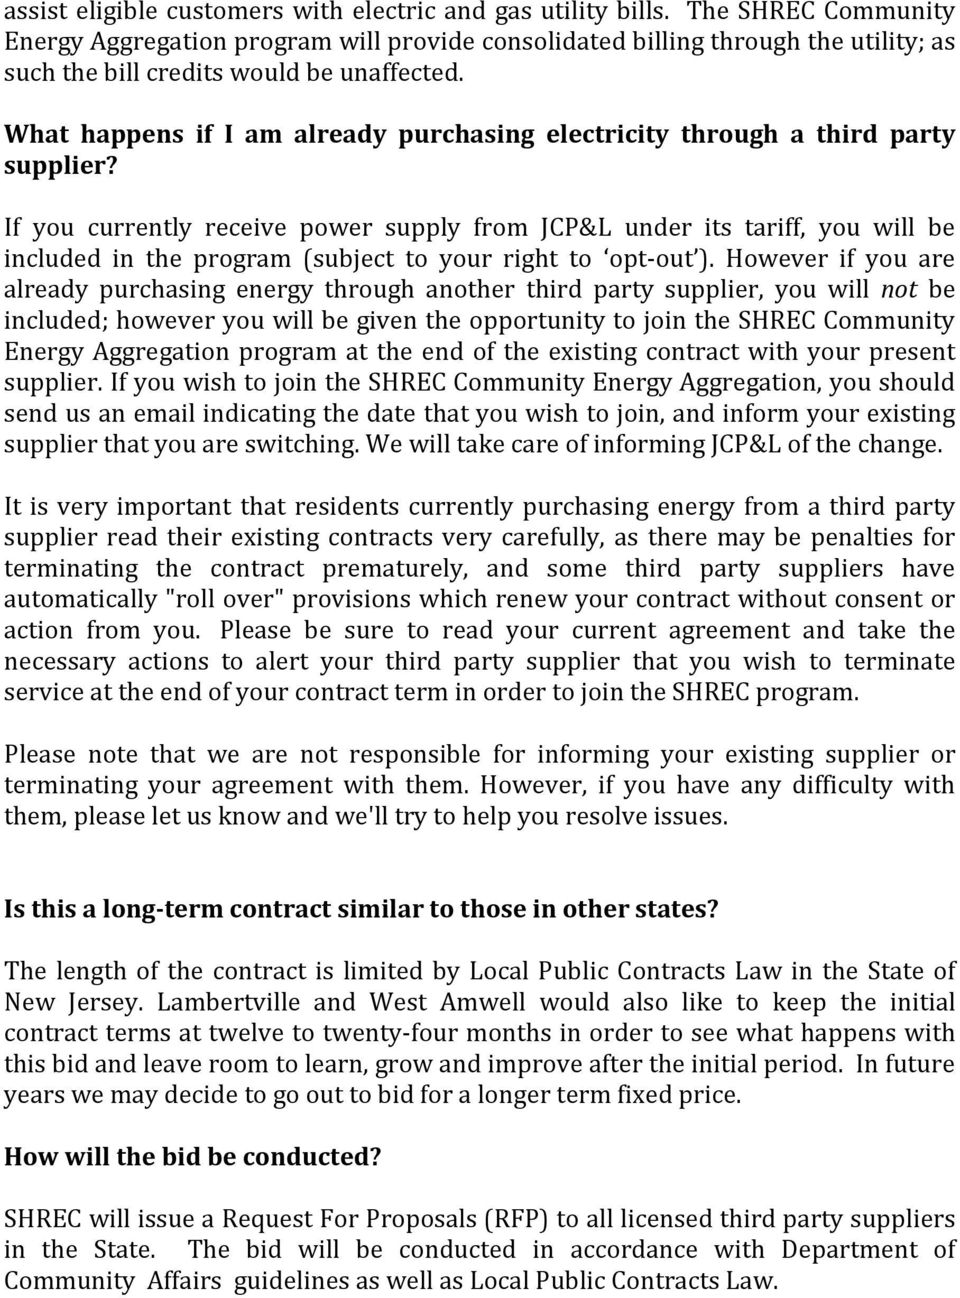 What happens if I am already purchasing electricity through a third party supplier?